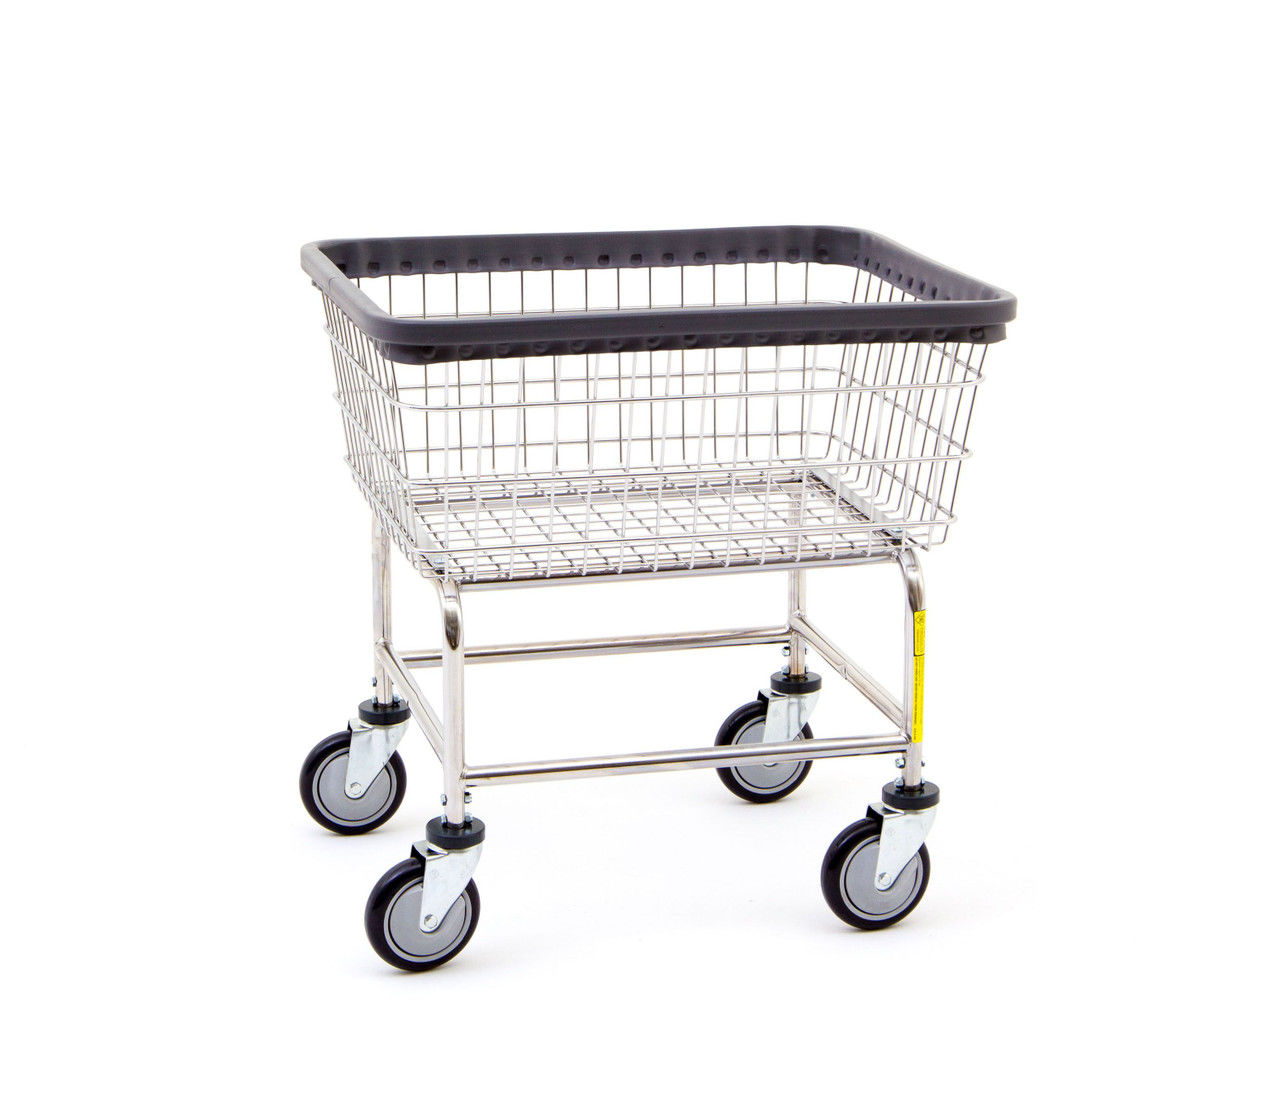 What's the material of this commercial laundry cart on wheels?